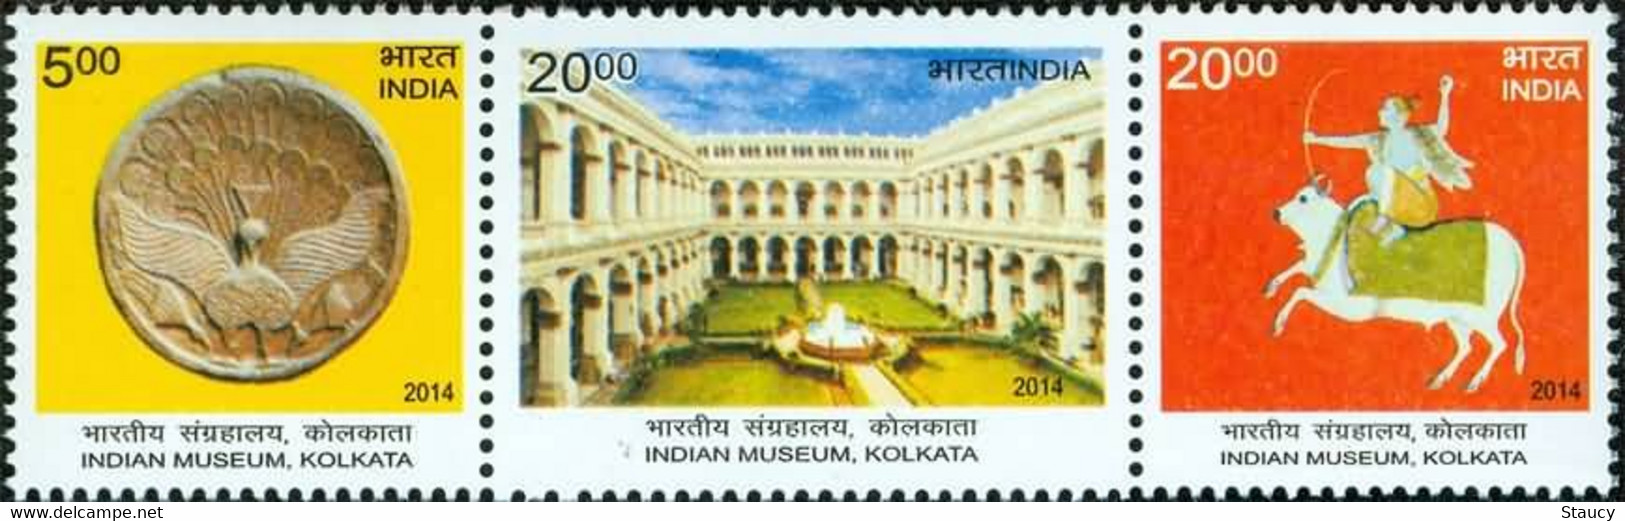 INDIA 2014 200 YEARS OF INDIAN MUSEUM KOLKATA 3v SET MNH (Archelogy, Art, Painting, History) As Per Scan - Gravures